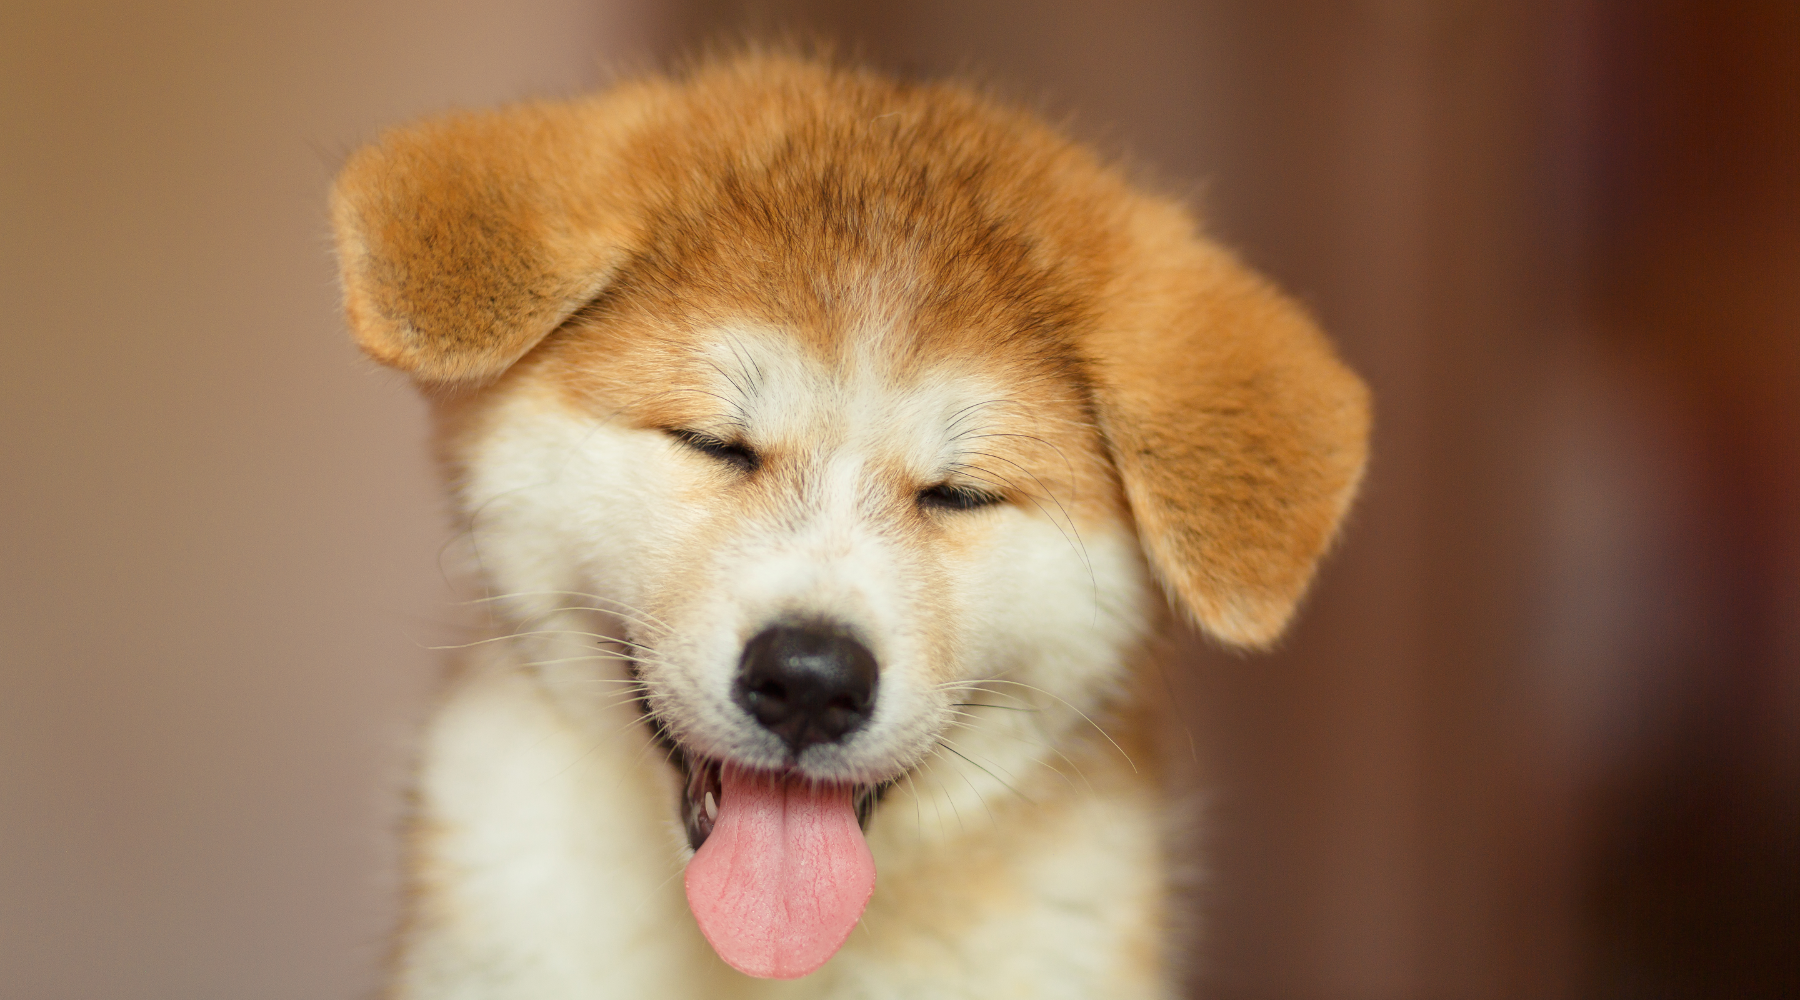 Puppy sticking tongue out